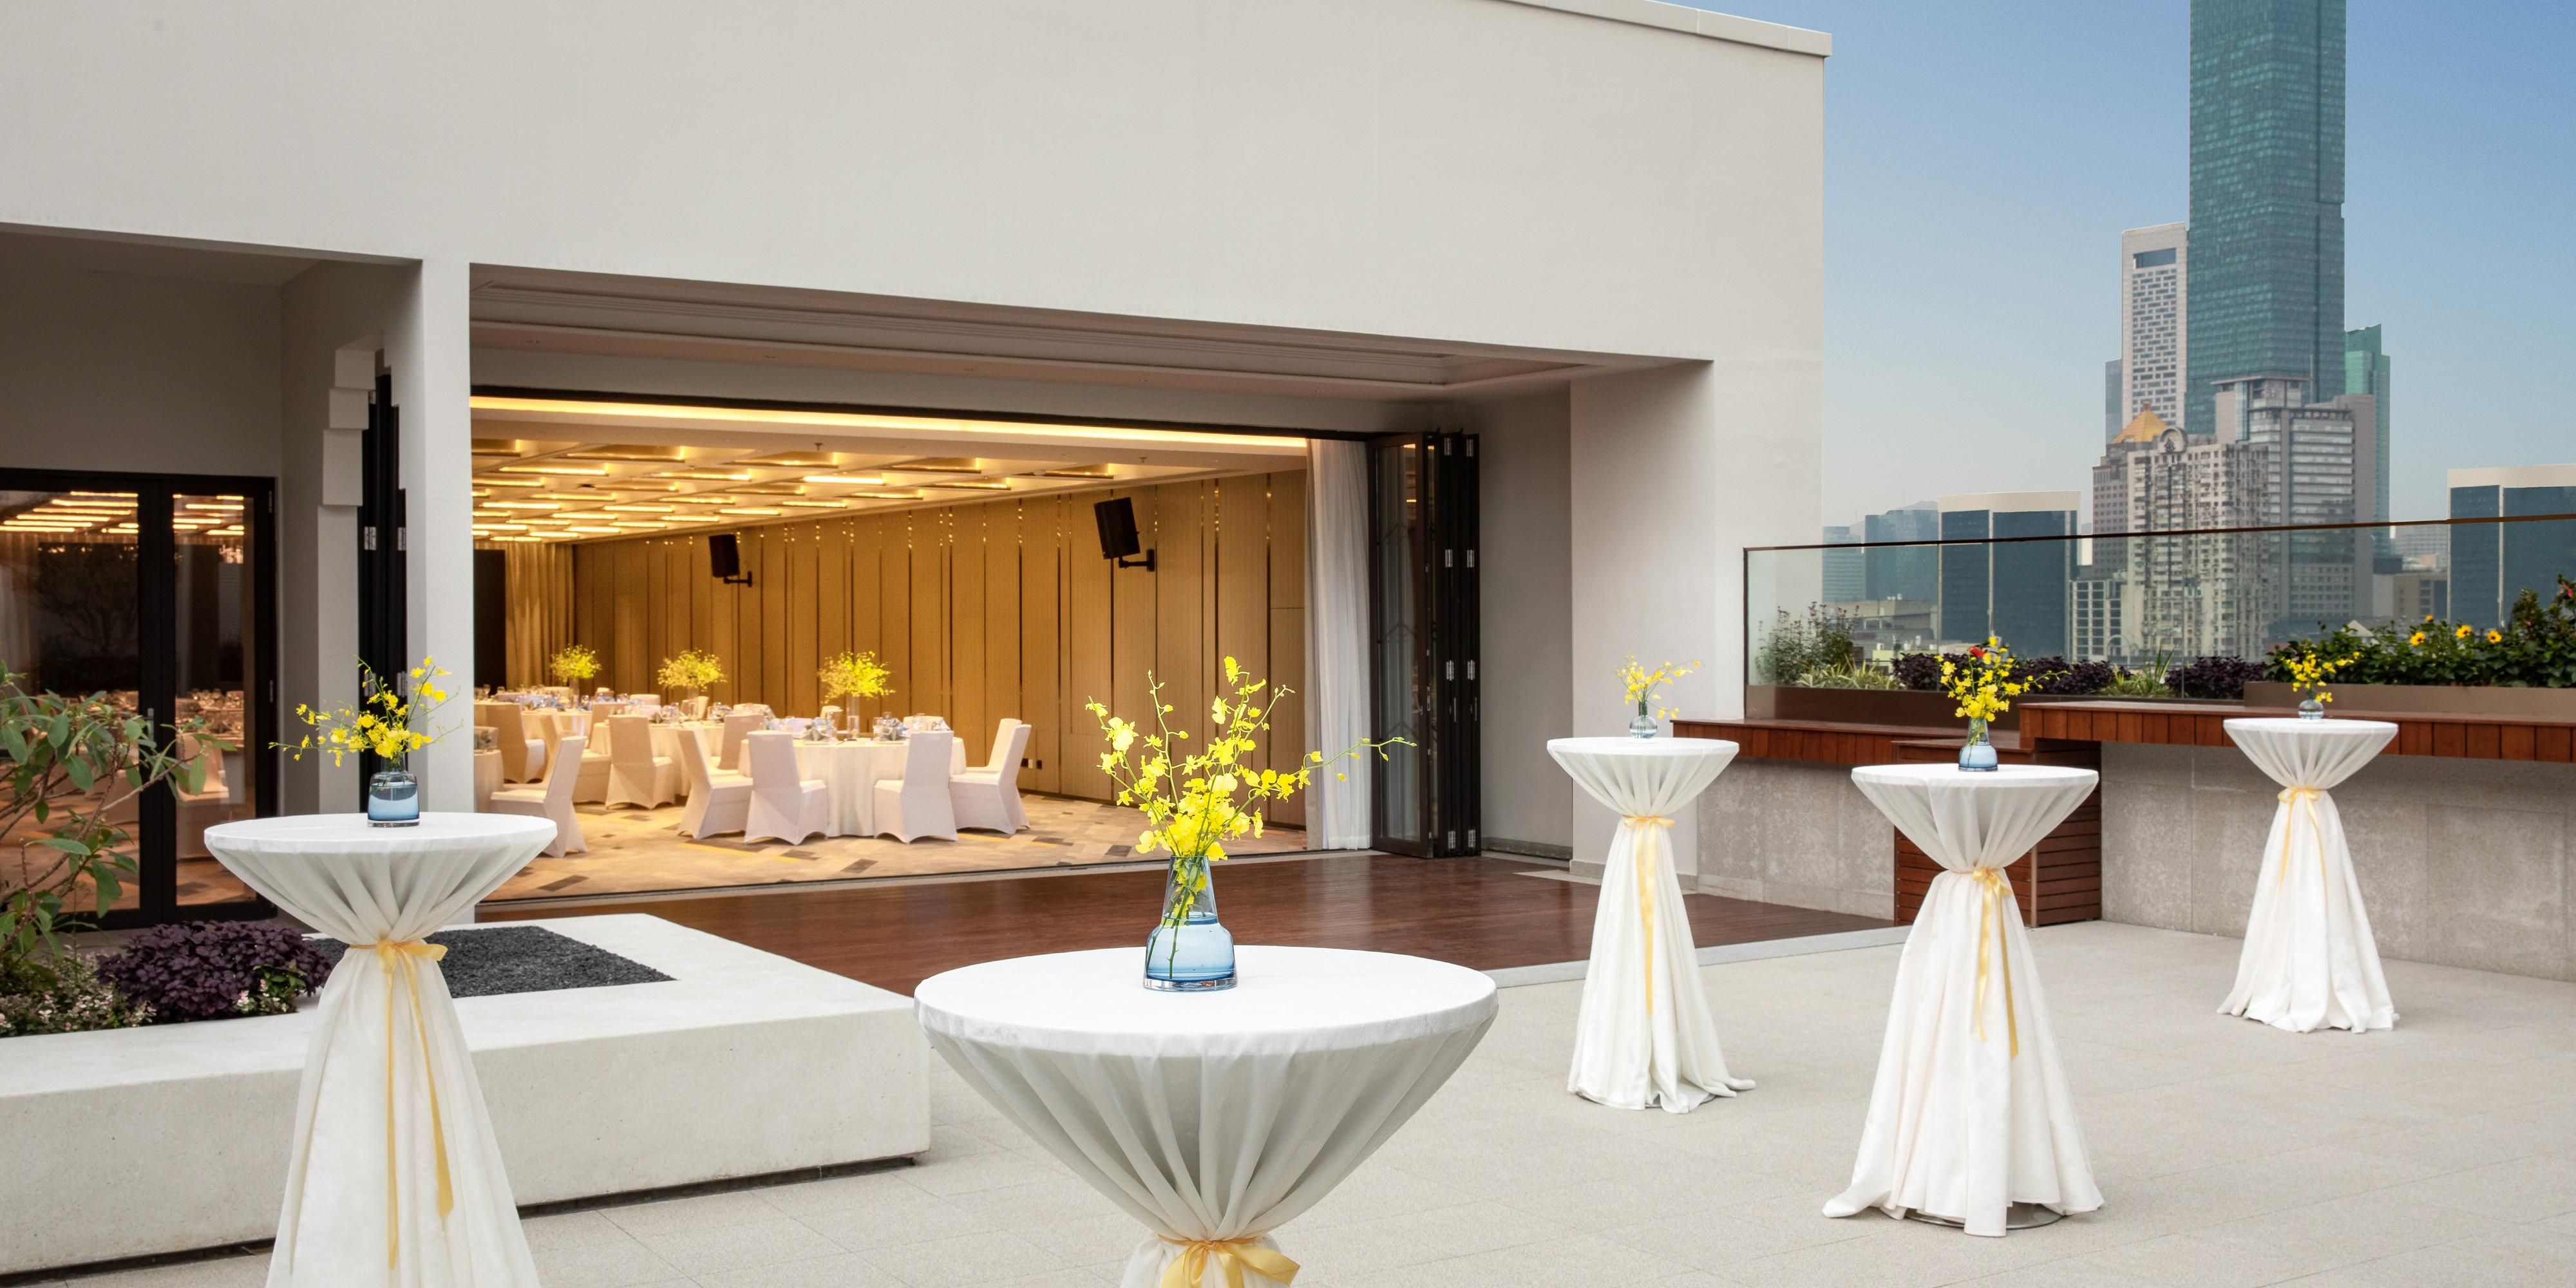 Set on the 10th floor, the hotel meetings and events space is designed to highlight the relationship between beauty and nature. Here, we offer 2 versatile ballrooms, a 240-square-meter grand ballroom and a 78-square-meter function room.